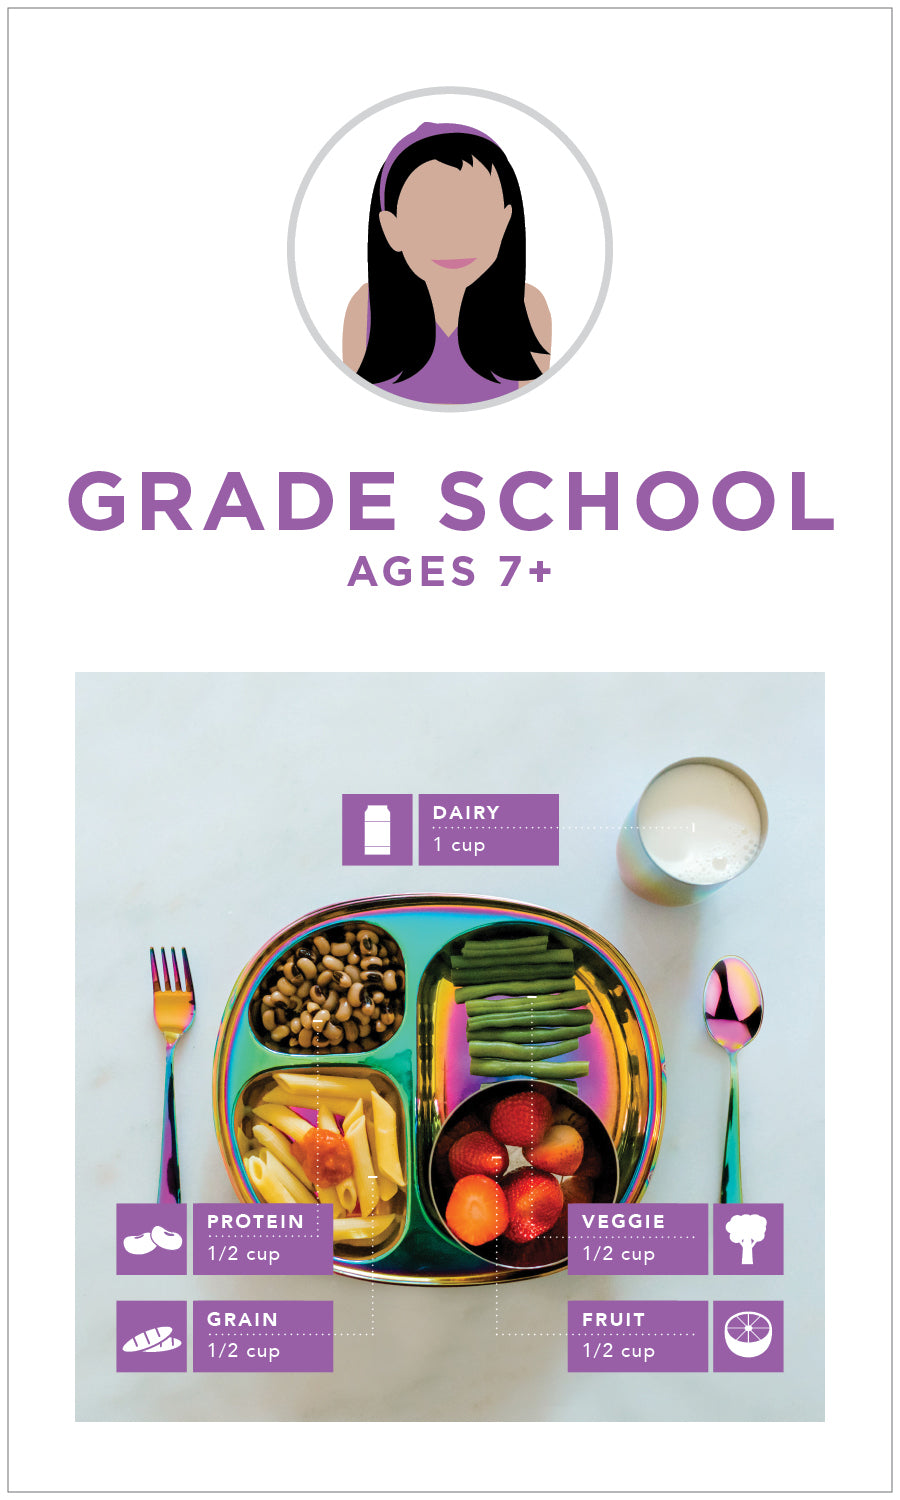 Grade School ages 7+ Mealtime Guides - Dairy 1 cup, Protein 1/2 cup, Grain 1/2 cup, Veggie 1/2 cup and Fruit 1/2 cup